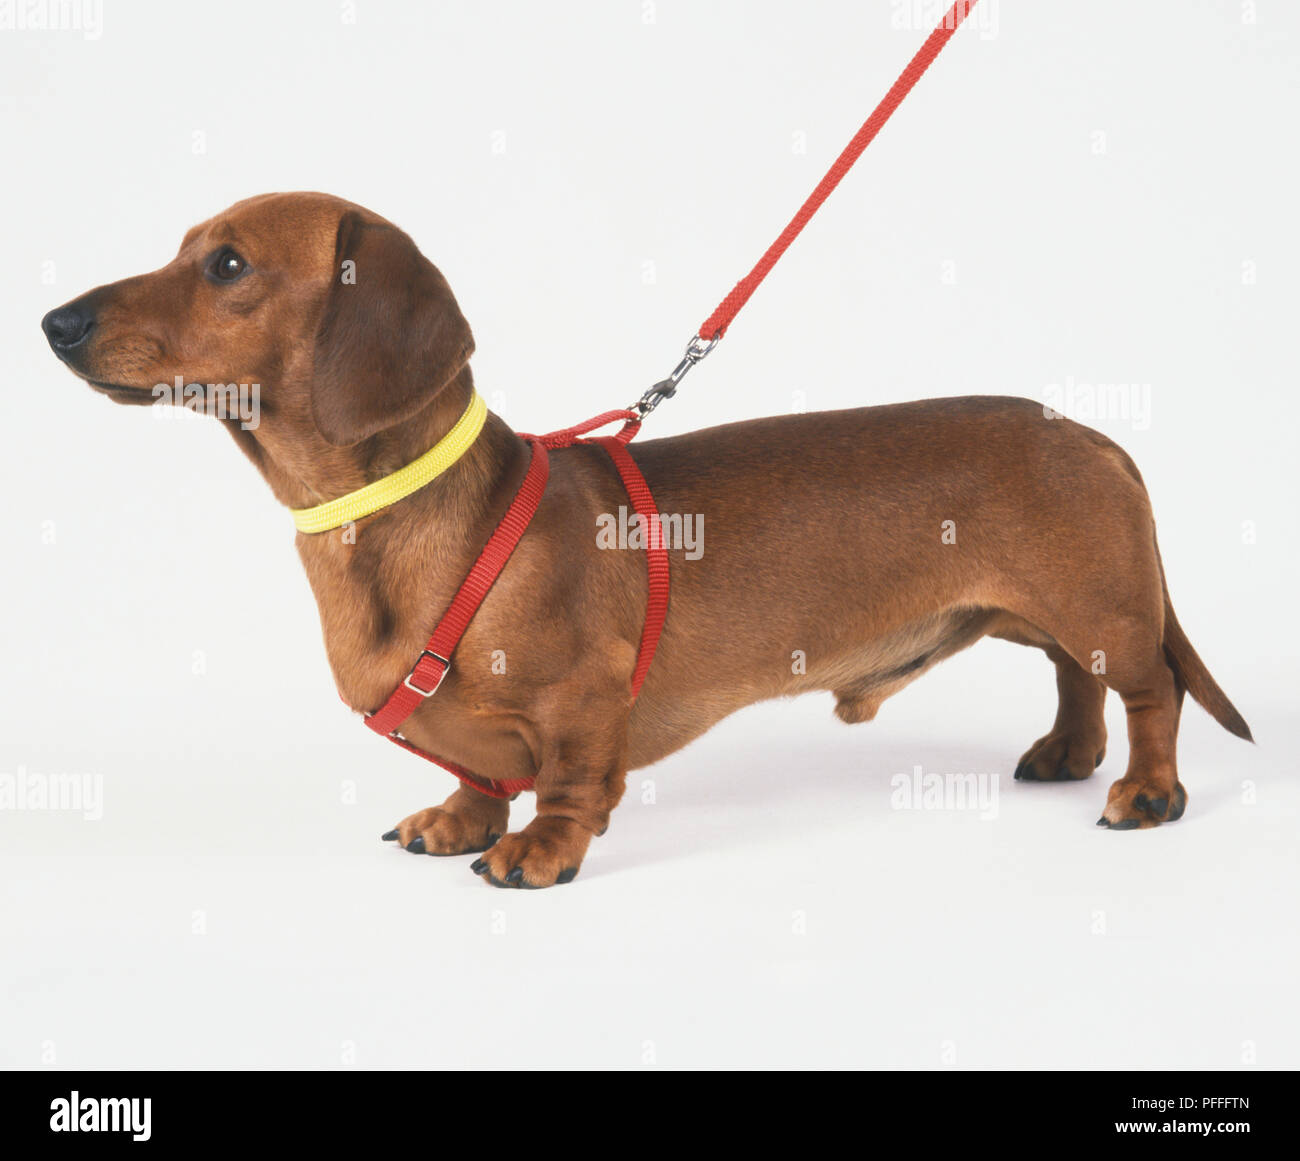 Short-haired, brown Dachshund (Canis familaris) wearing a body harness, side view Stock Photo